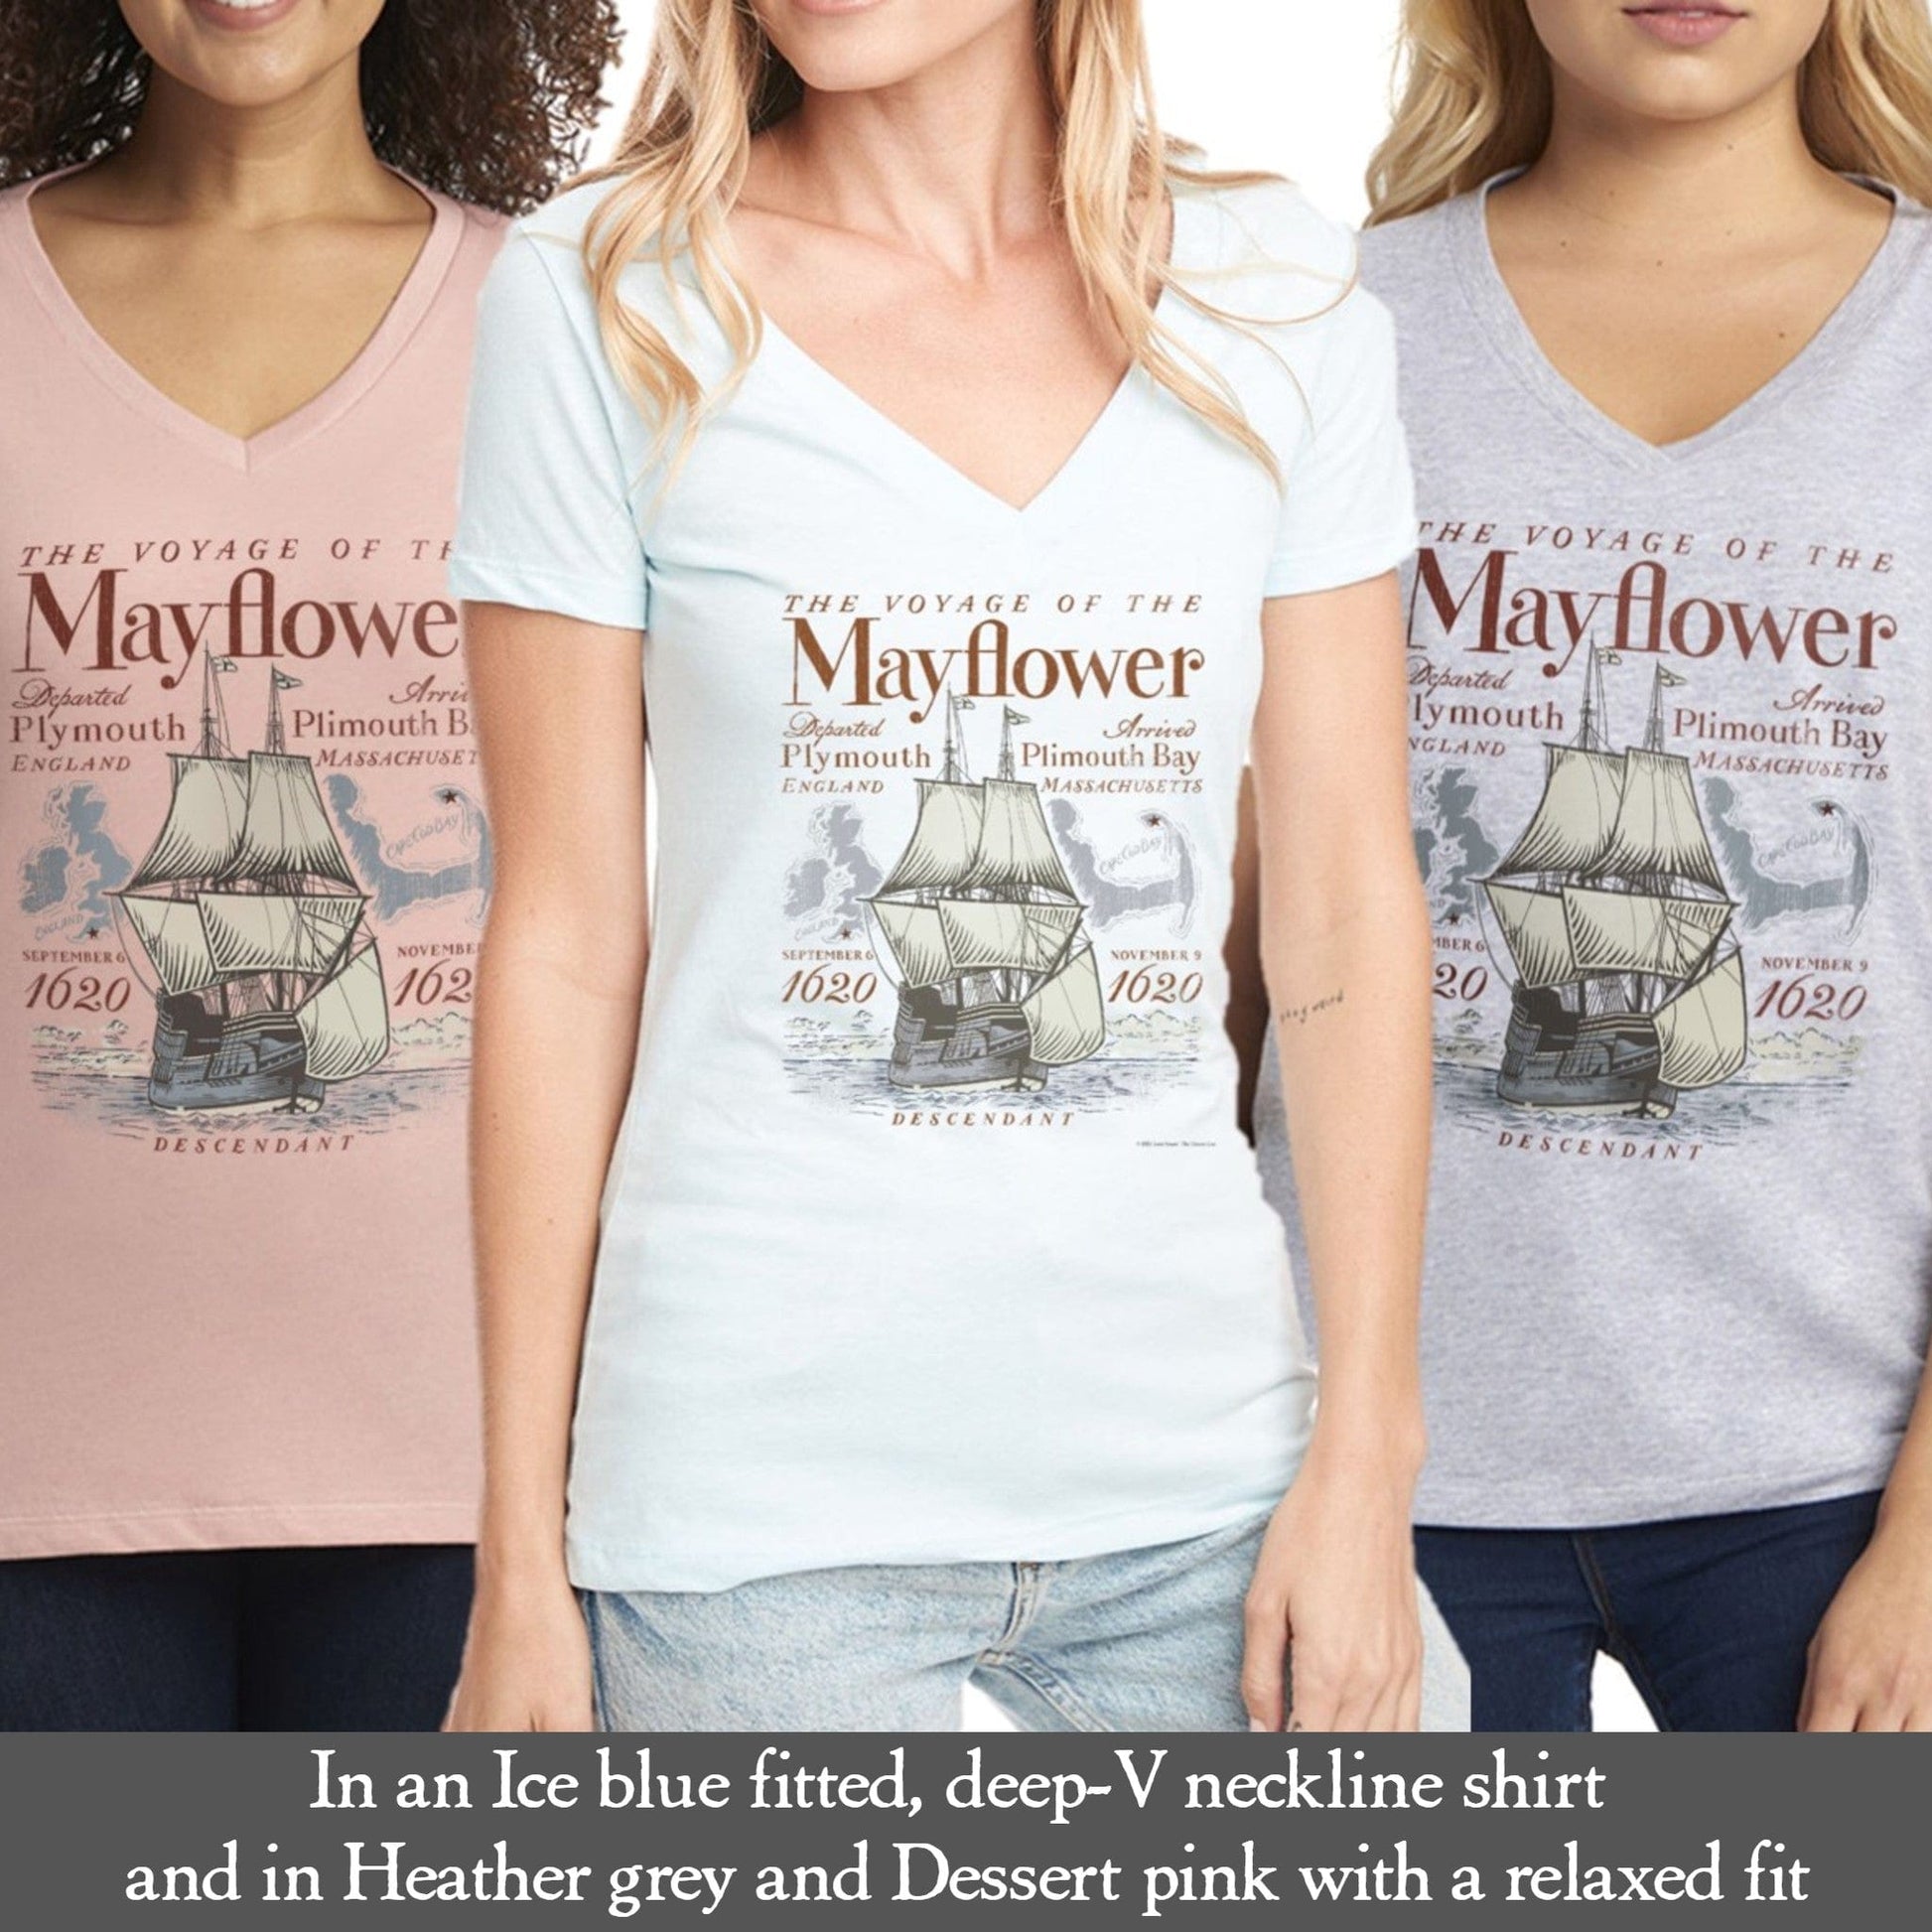 "The Voyage of the Mayflower" Women's v-neck shirt from the history list store